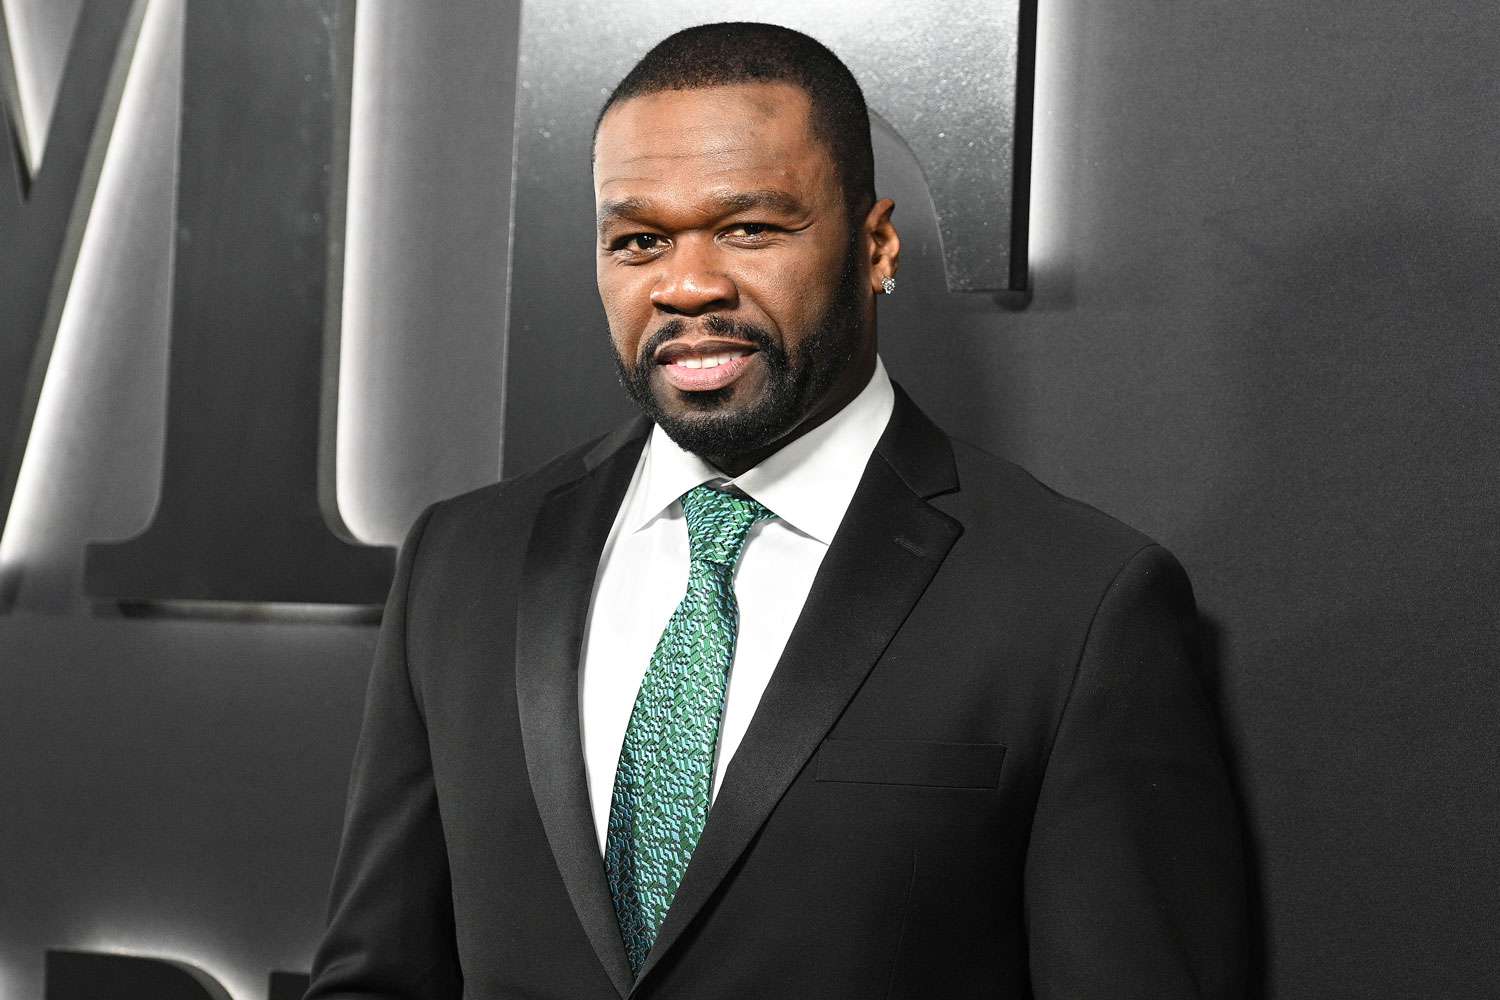 Curtis "50 Cent" Jackson at the season 2 premiere of "BMF" held at TCL Chinese Theatre on January 5, 2022 in Los Angeles, California.